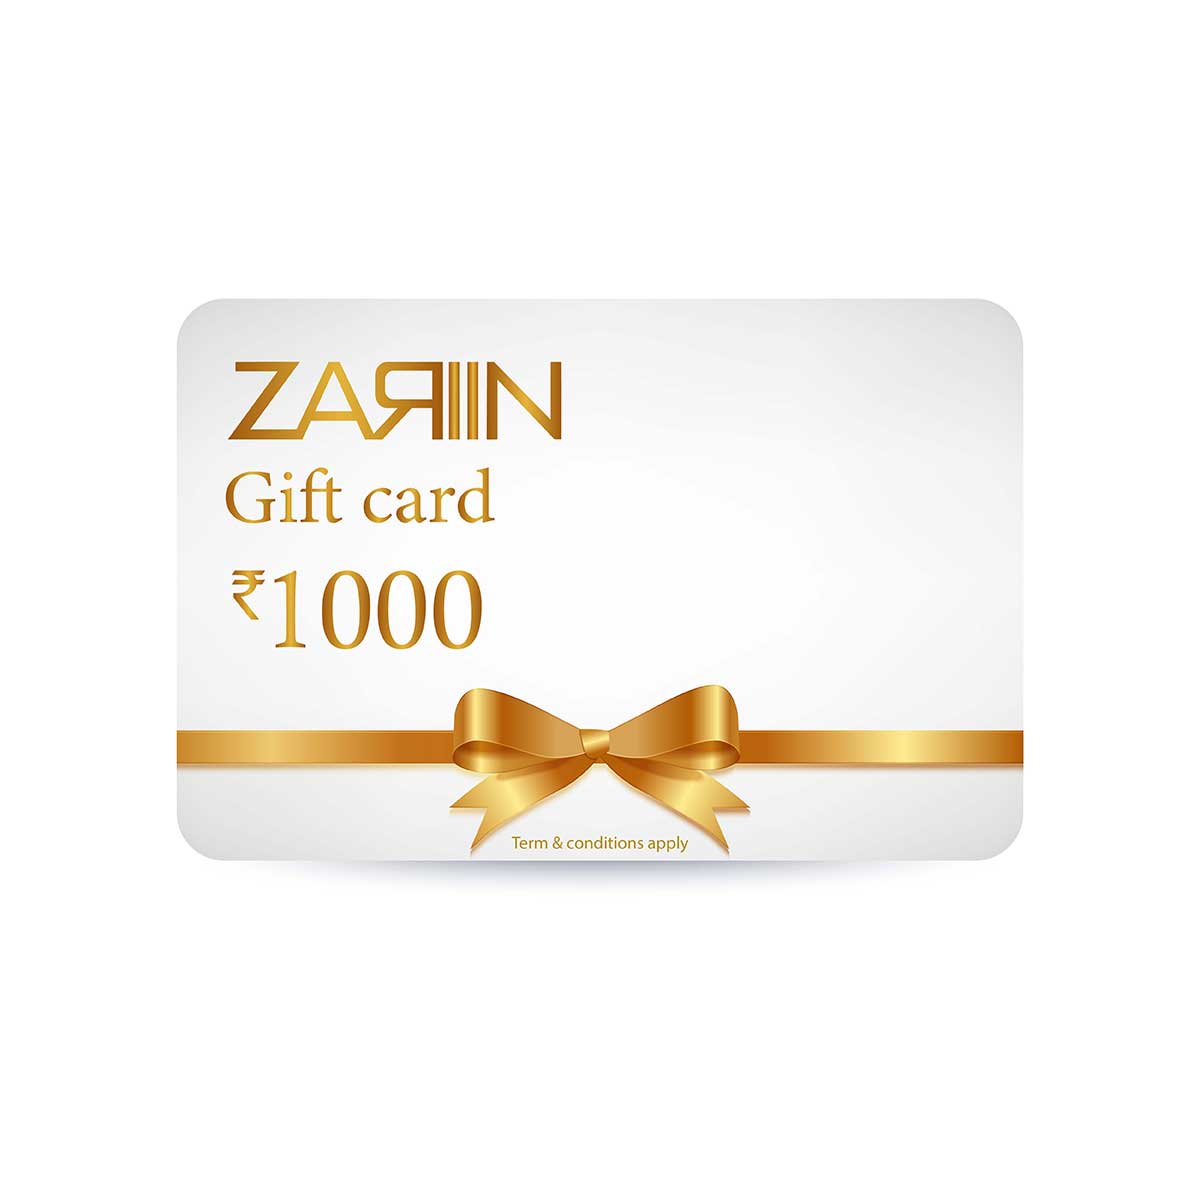 Buy Gift Vouchers Online, Gift Cards Online, E Gift Vouchers in India